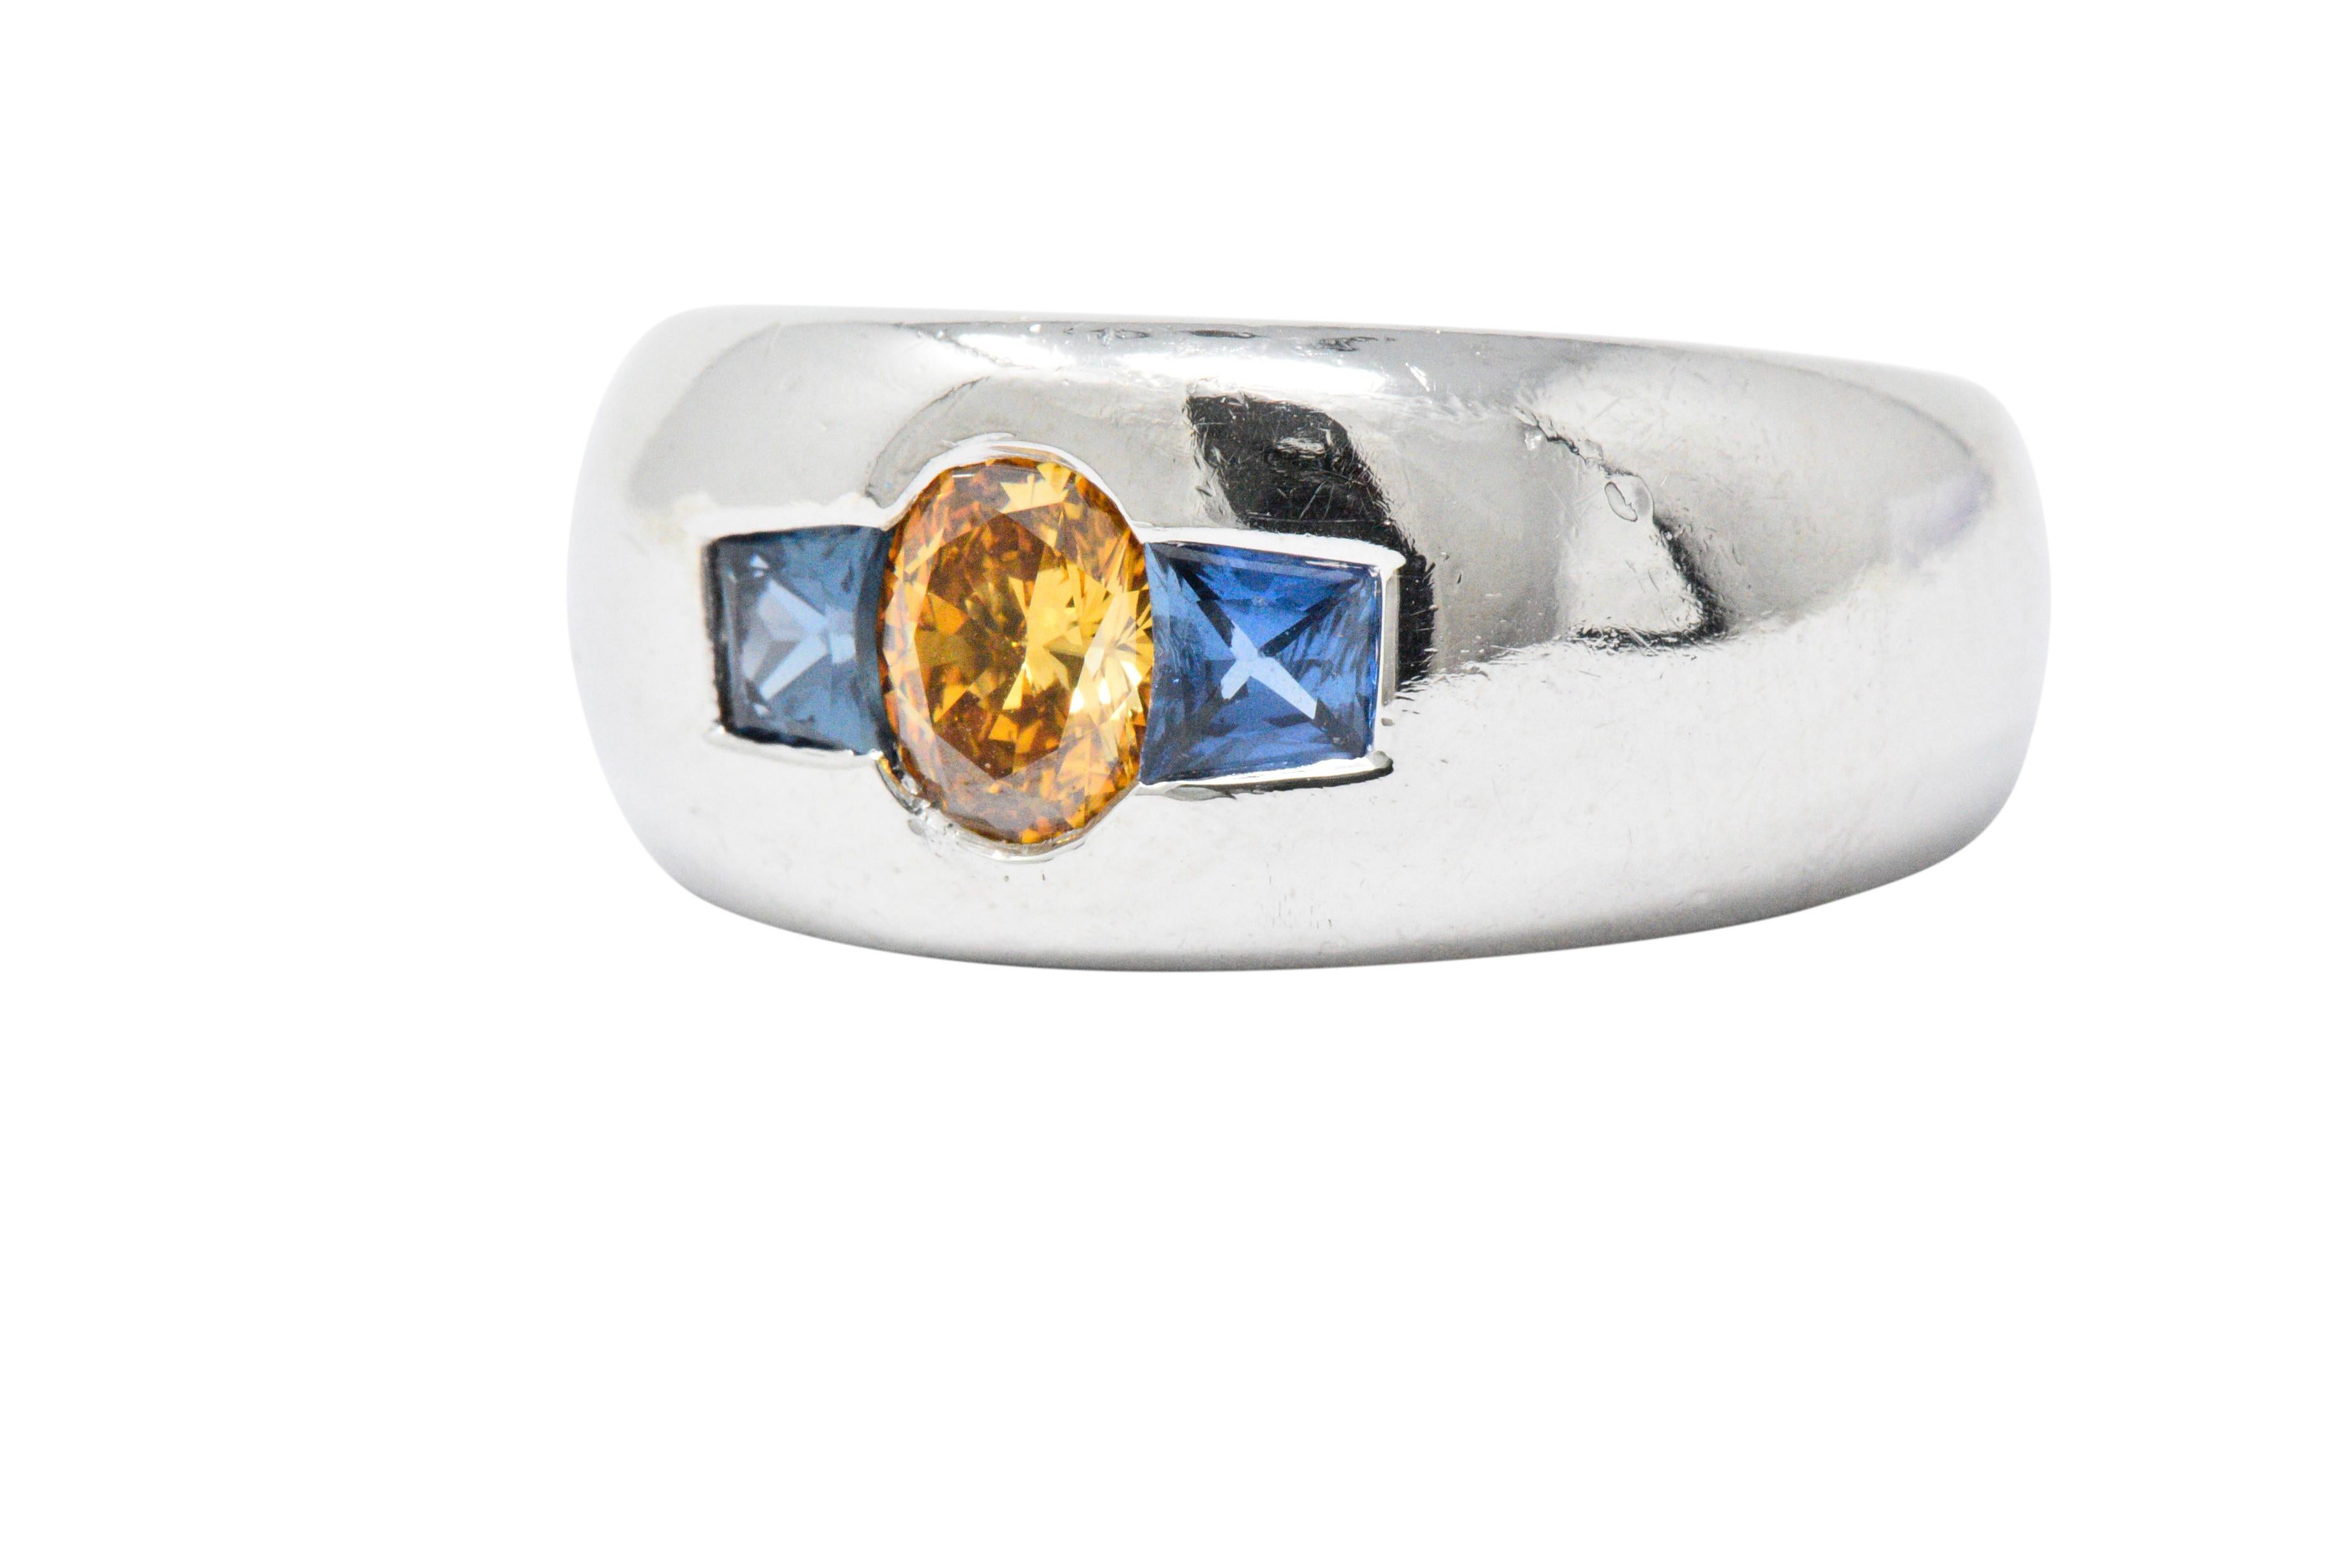 Centering an oval cut diamond weighing 0.59 carats, natural fancy intense yellow-orange color and VS1 clarity

Flanked by two trapezoid cut sapphires weighing approximately 0.60 carats total, bright, deep cornflower blue

In a flush or 